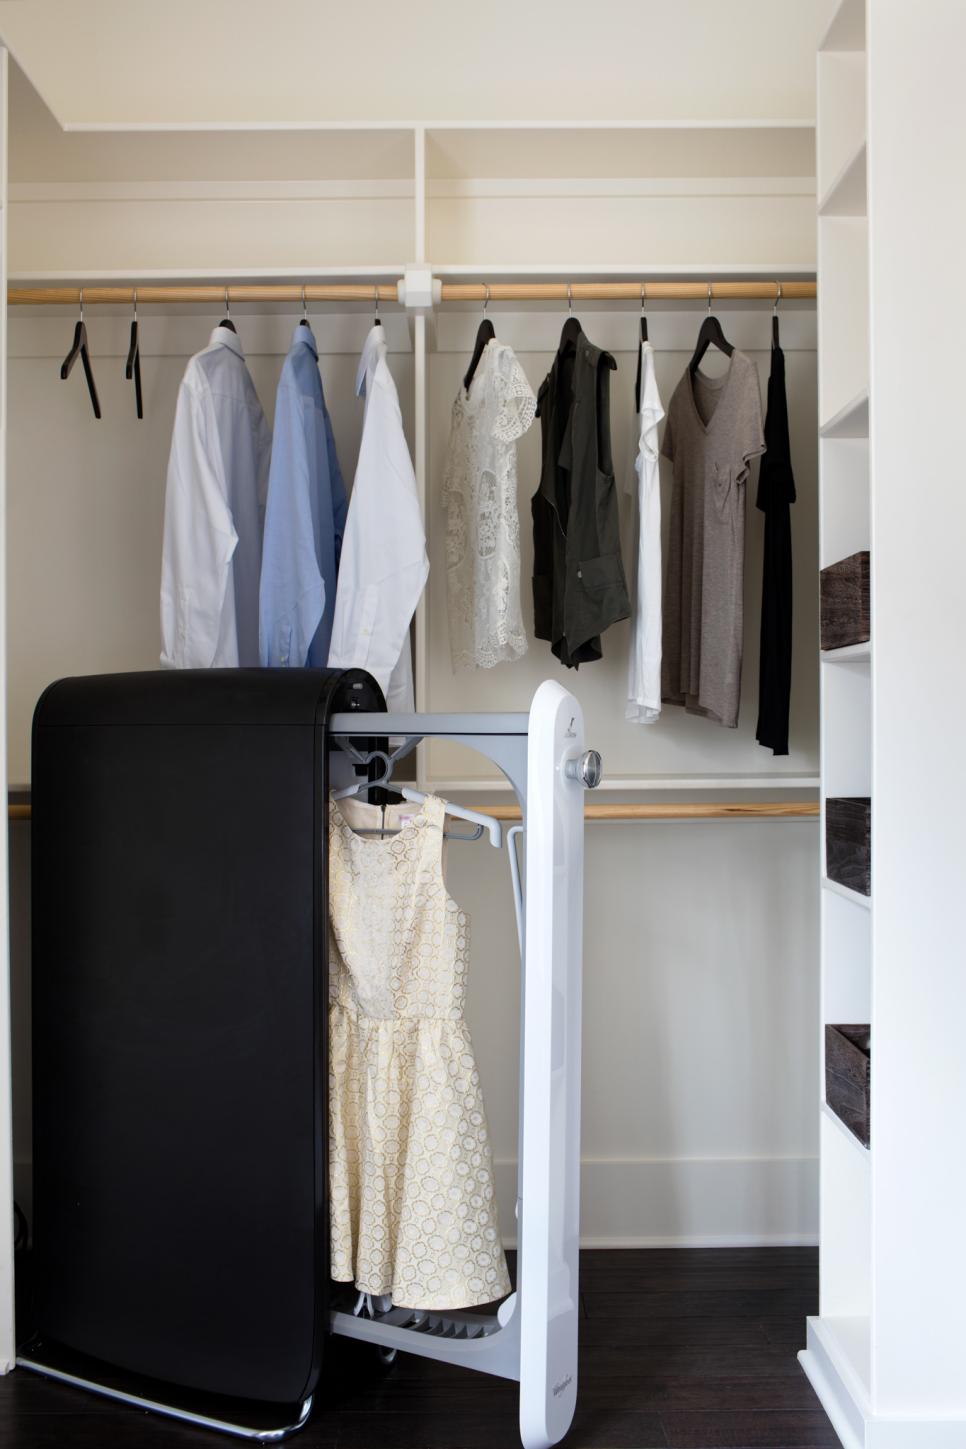 What is an Oversized Closet?